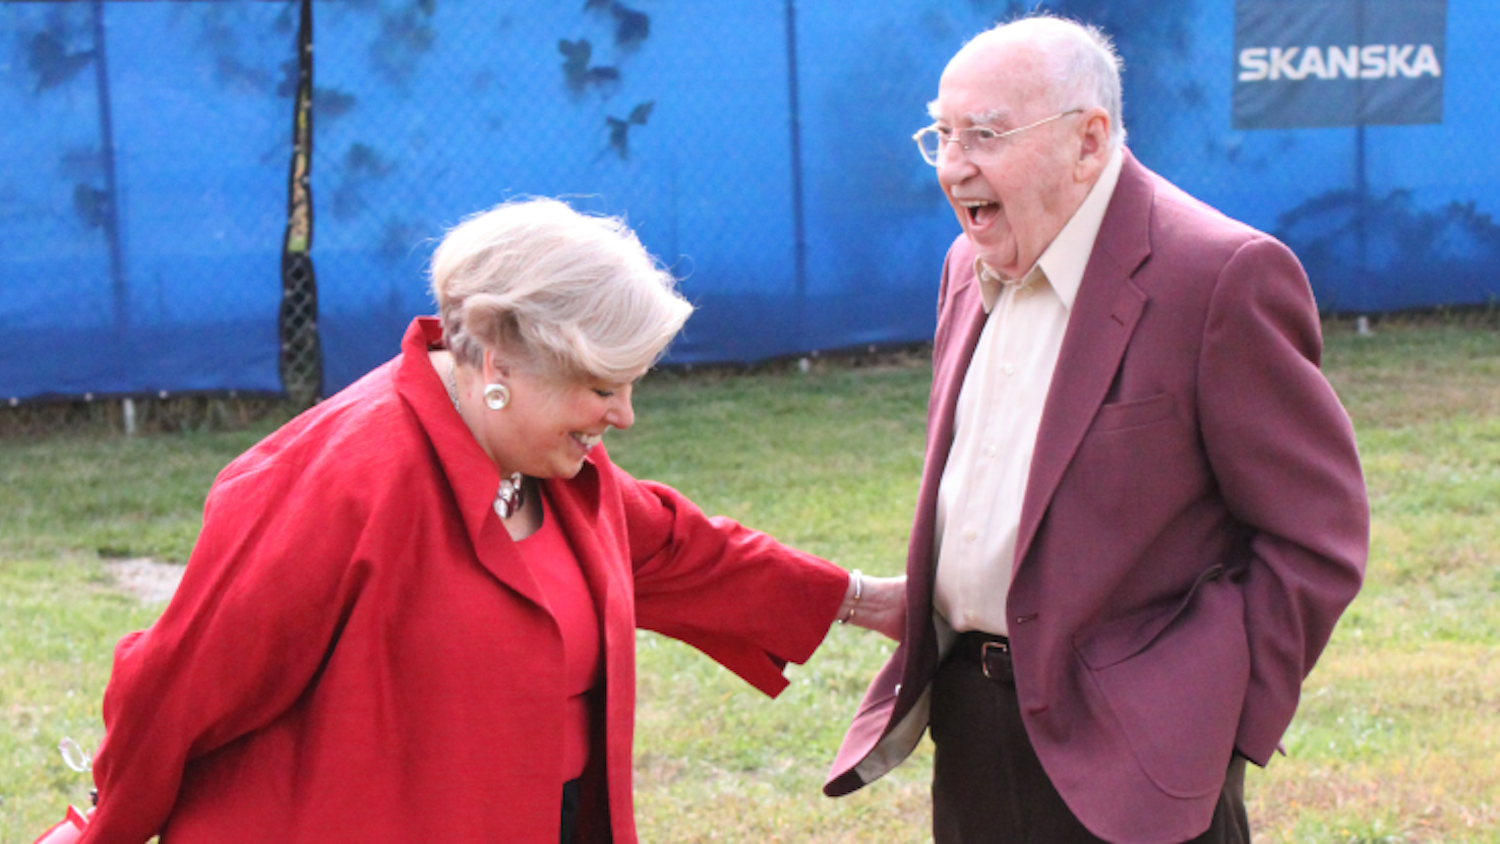 Former Vice Provost and Director of the Libraries Susan Nutter shares a laugh with the previous Director of the Libraries I.T. Littleton at the James B. Hunt Jr. Library groundbreaking in October of 2009.